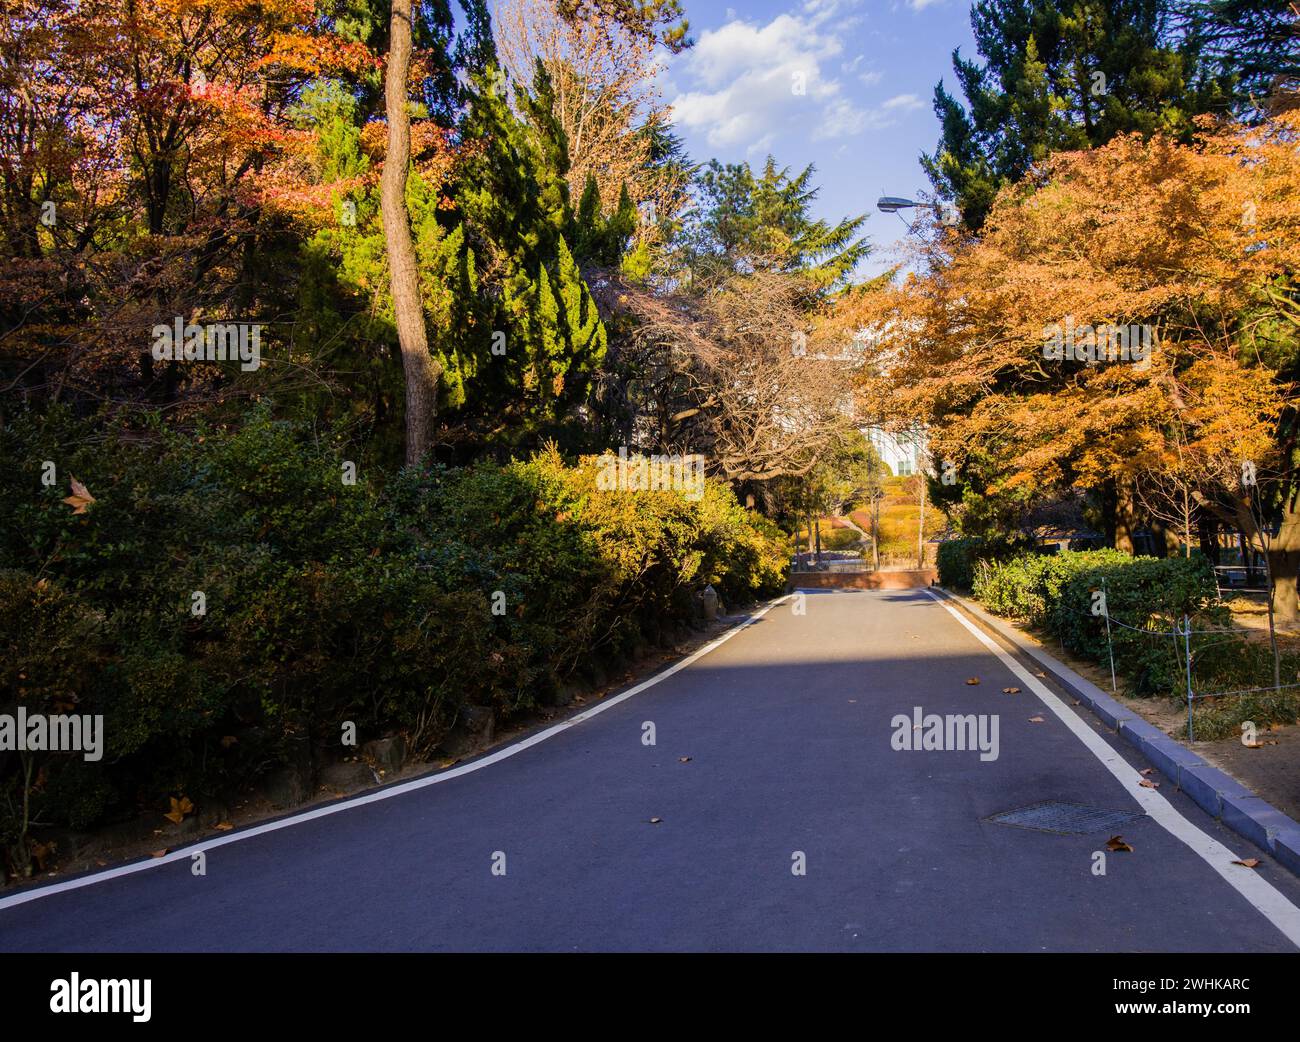 Paved road in a peaceful park like setting of lush foliage bathed in the afternoon sun Stock Photo